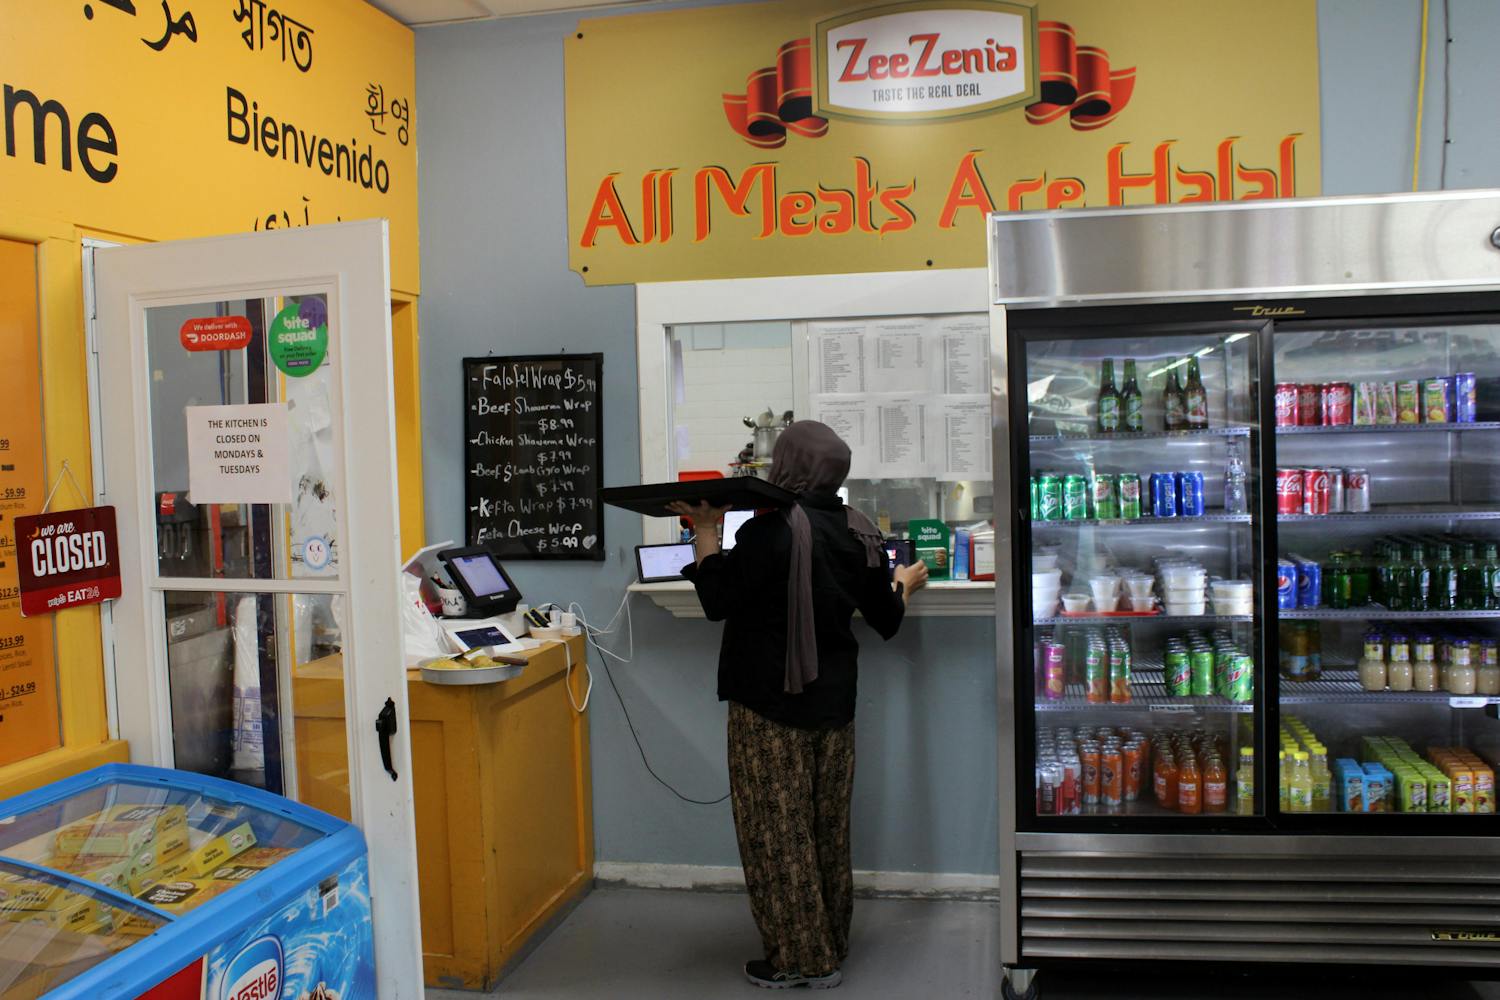 A worker at Zeezenia International Market delivers Mediterranean food to a customer on Friday, Feb. 11.